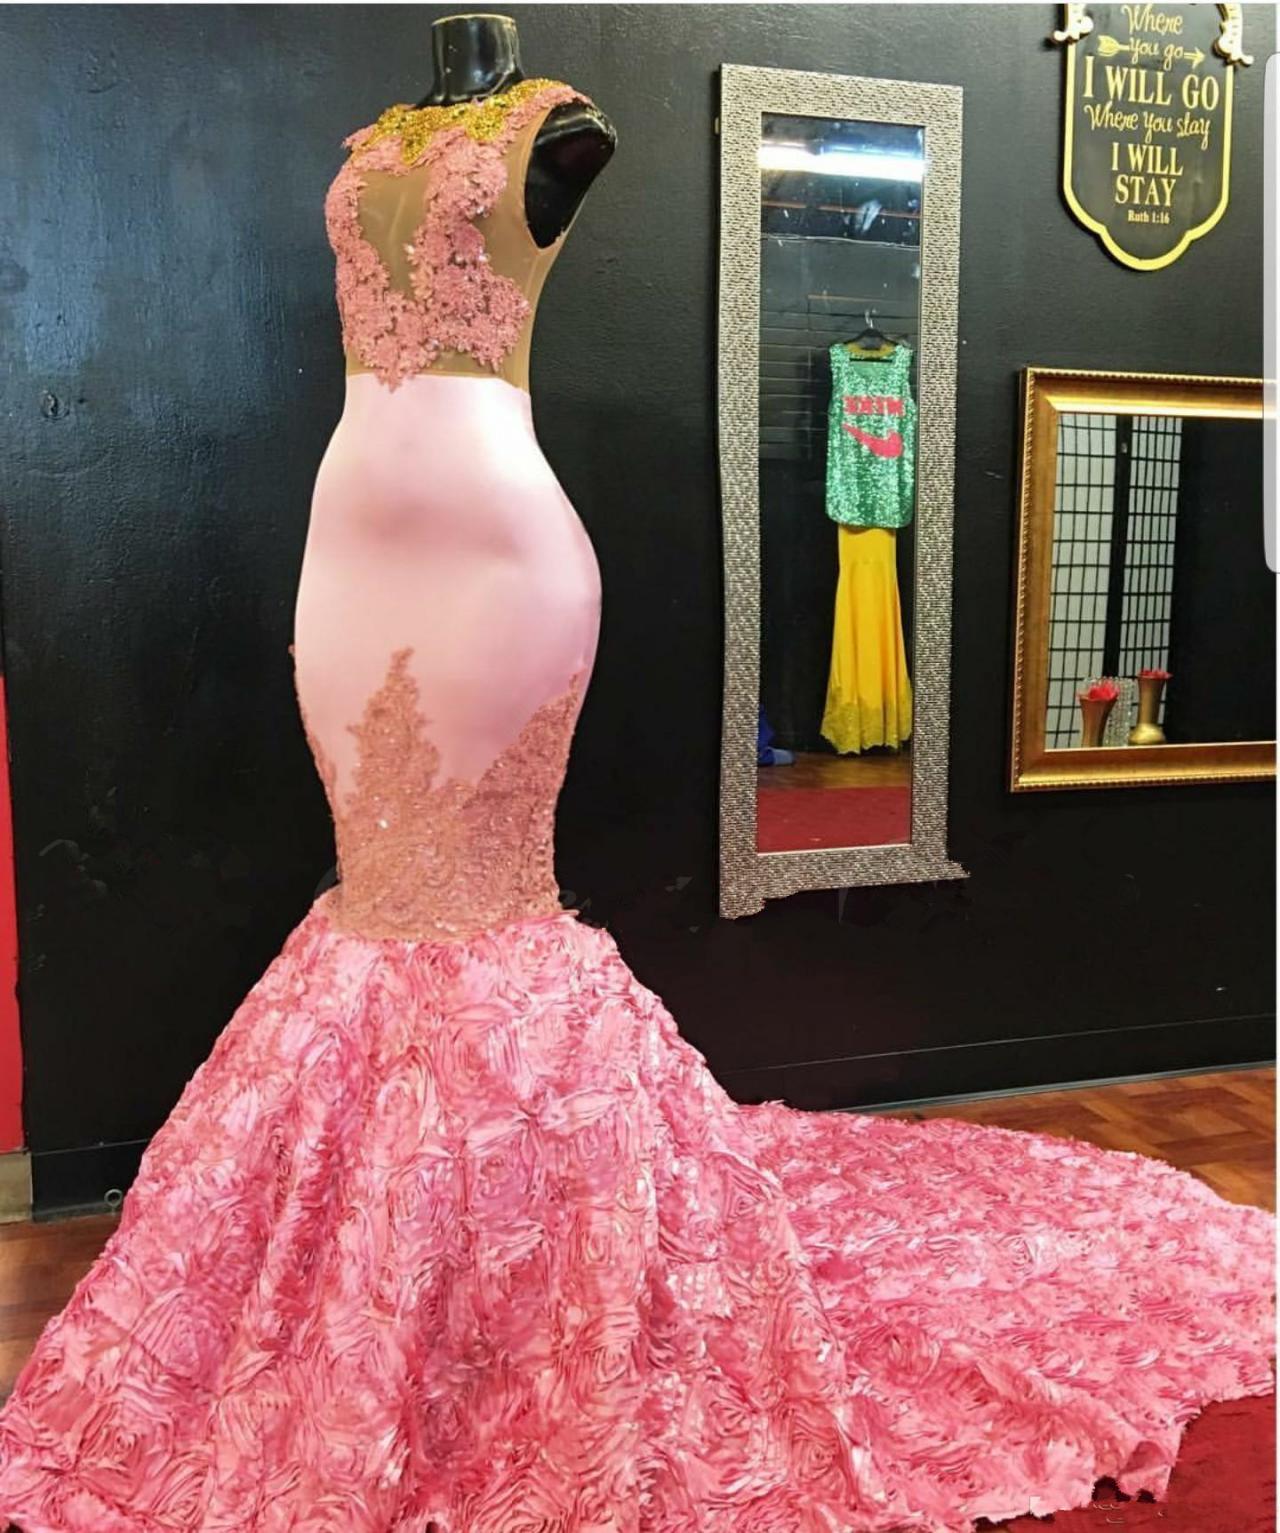 Pink Mermaid Prom Dress With 3d Floral Skirt